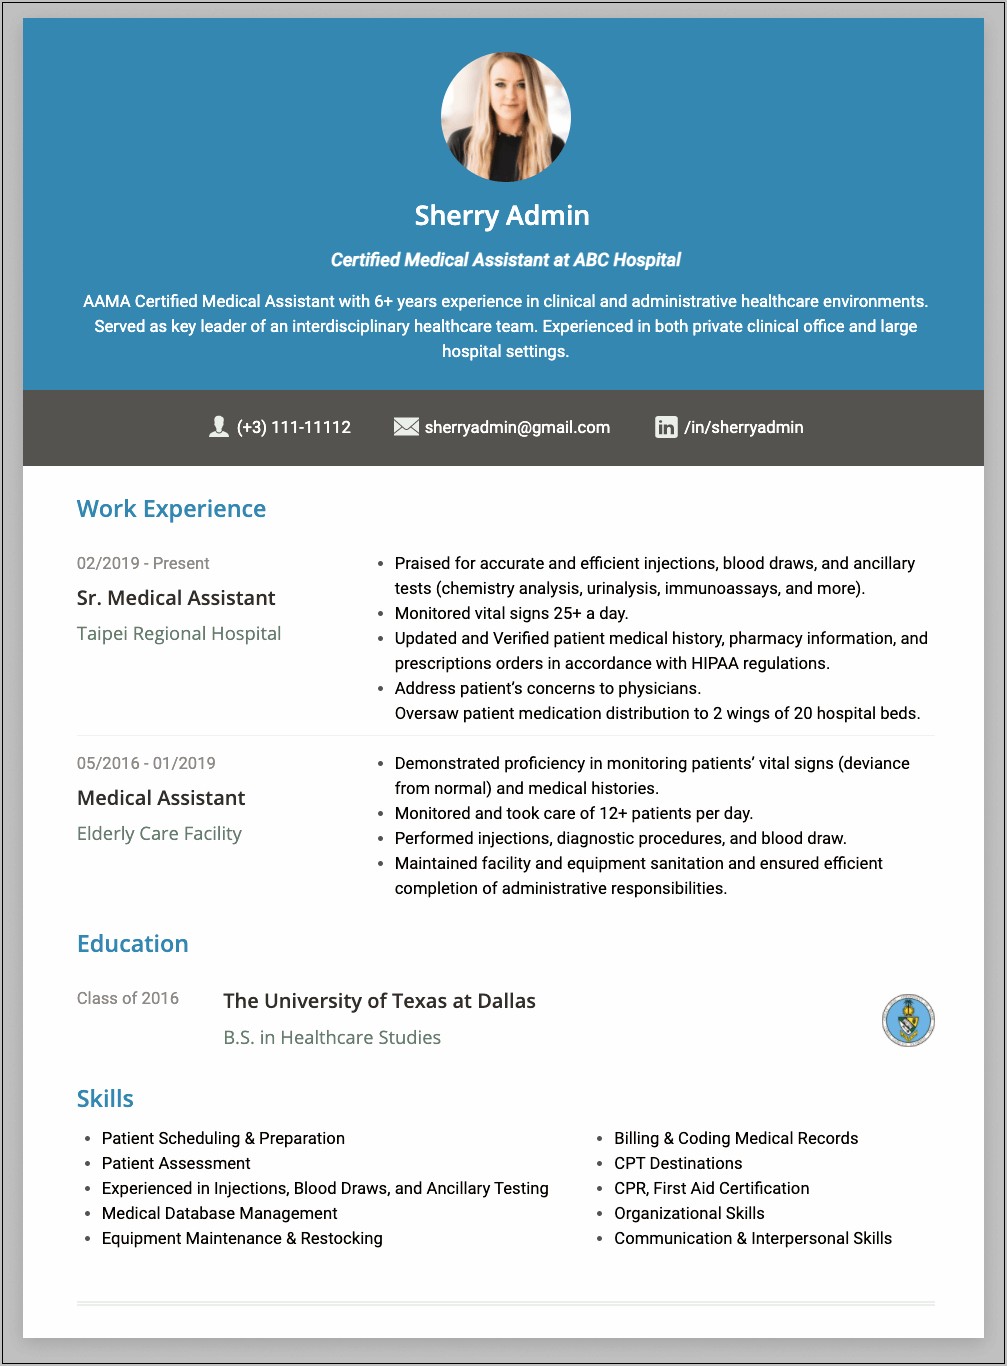 Best Resume Summary For Healthcare